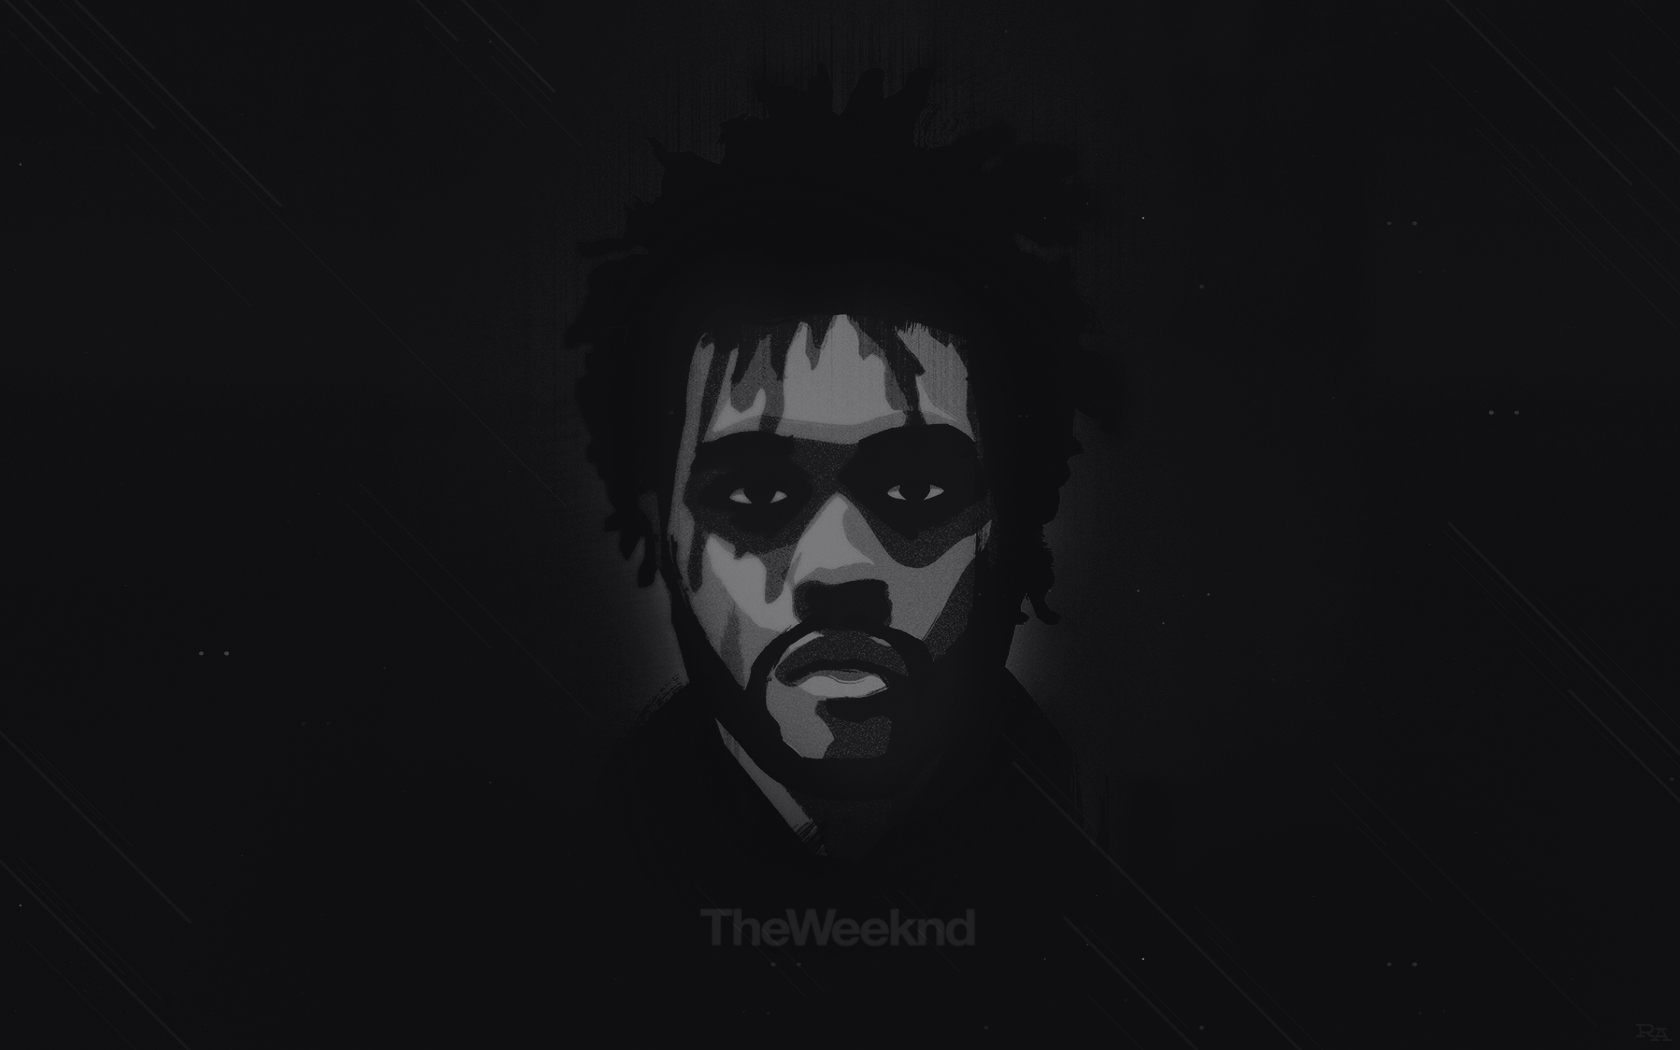 A black and white image of the weekend - The Weeknd